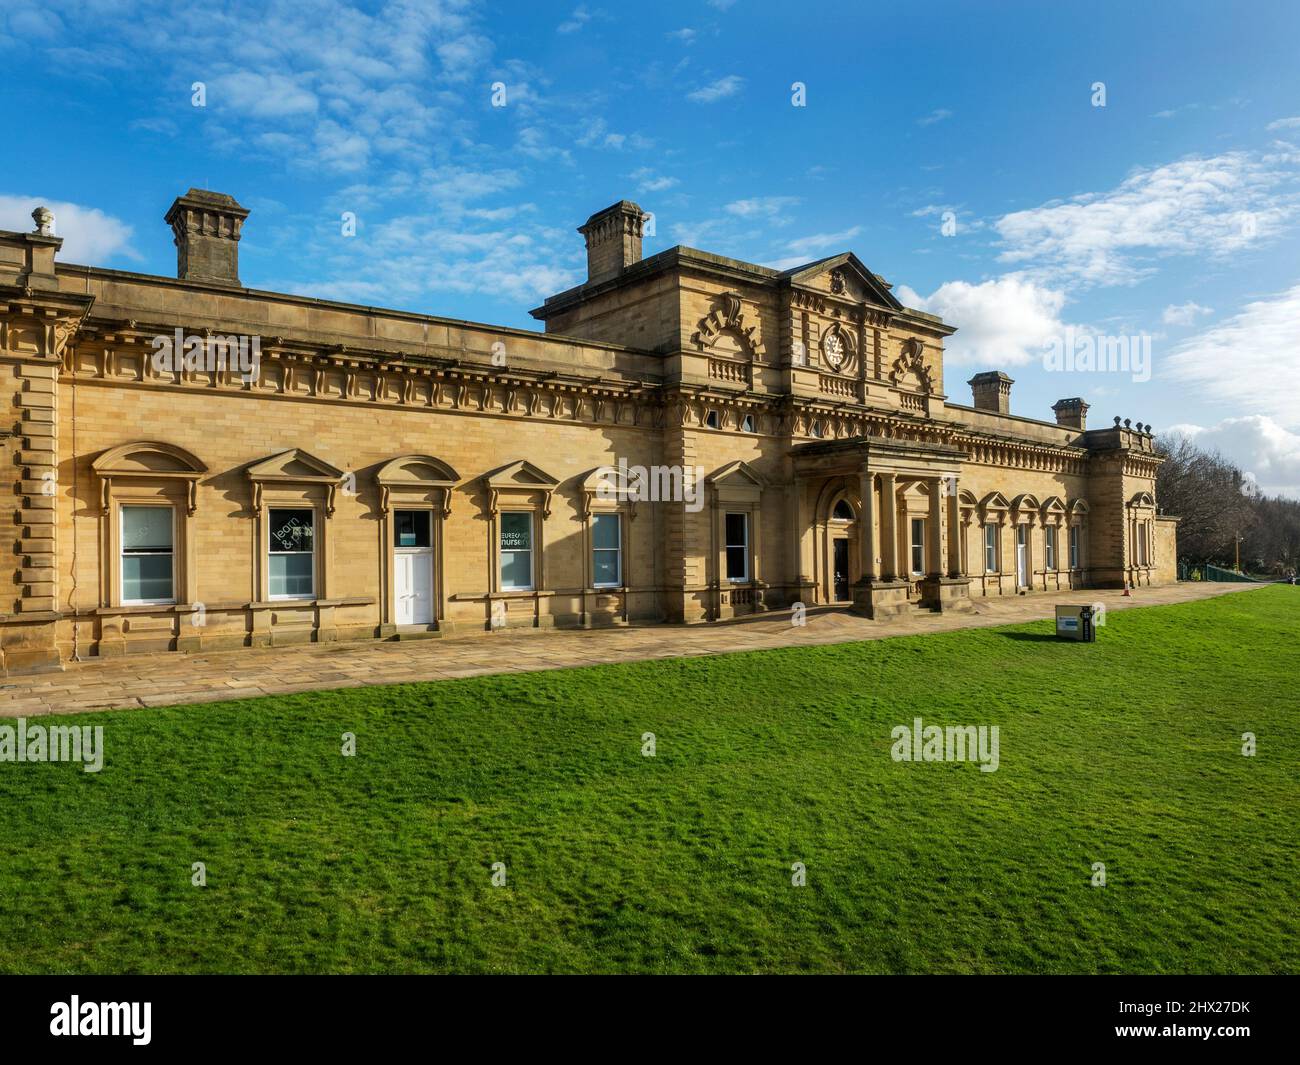 The 1855 Building formerly Halifax Railway Station built in 1855 Halifax West Yorkshire England Stock Photo